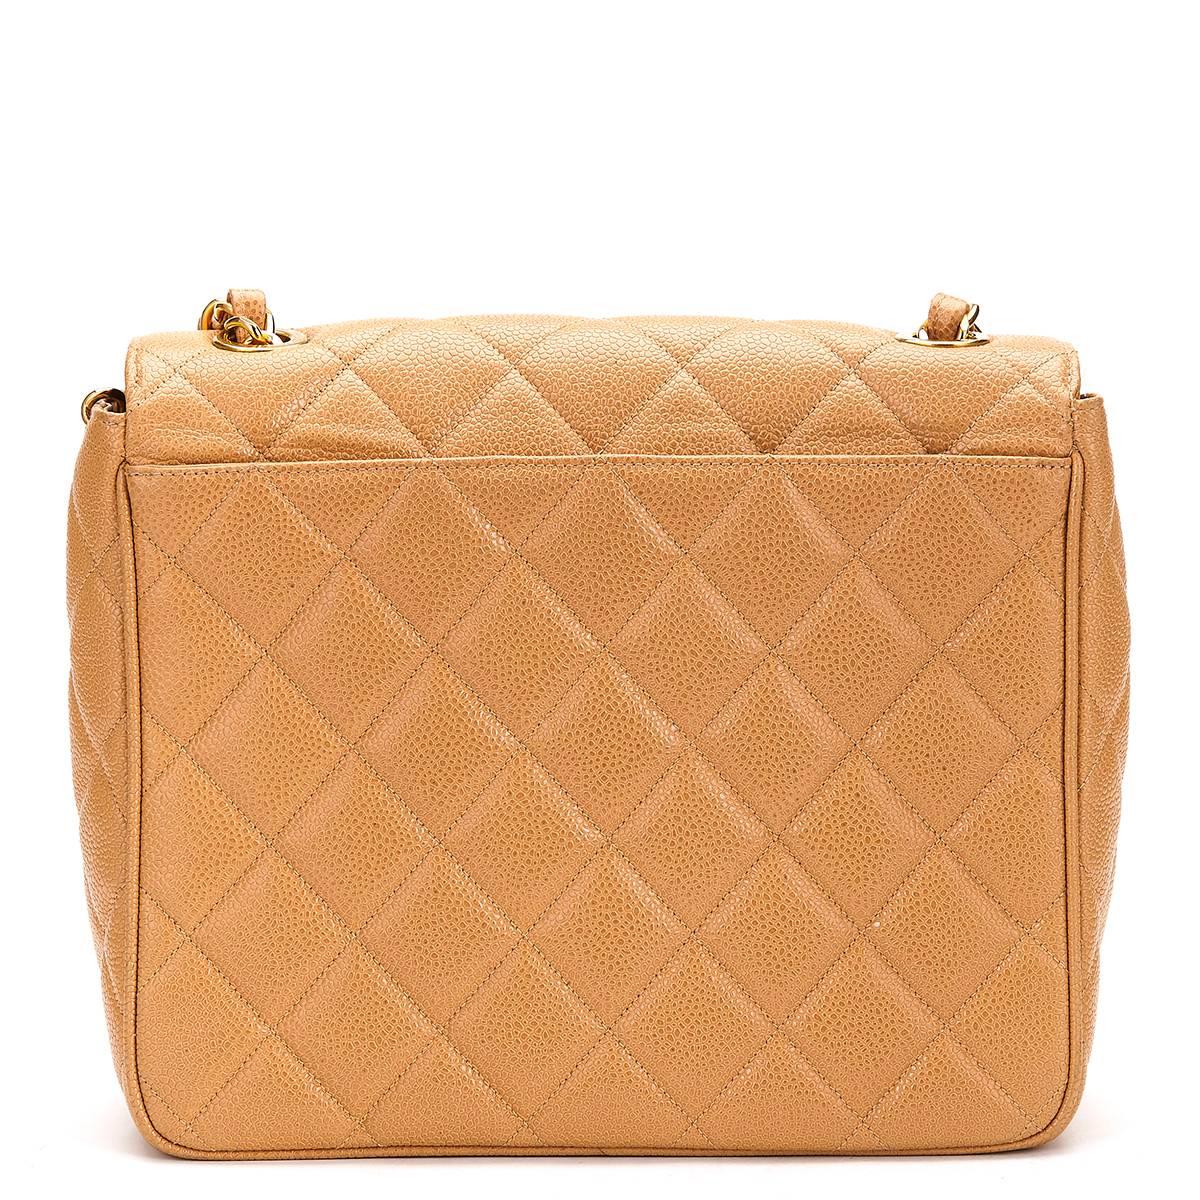 1990s Chanel Mini Tan Quilted Caviar Leather Vintage Single Flap Bag 3